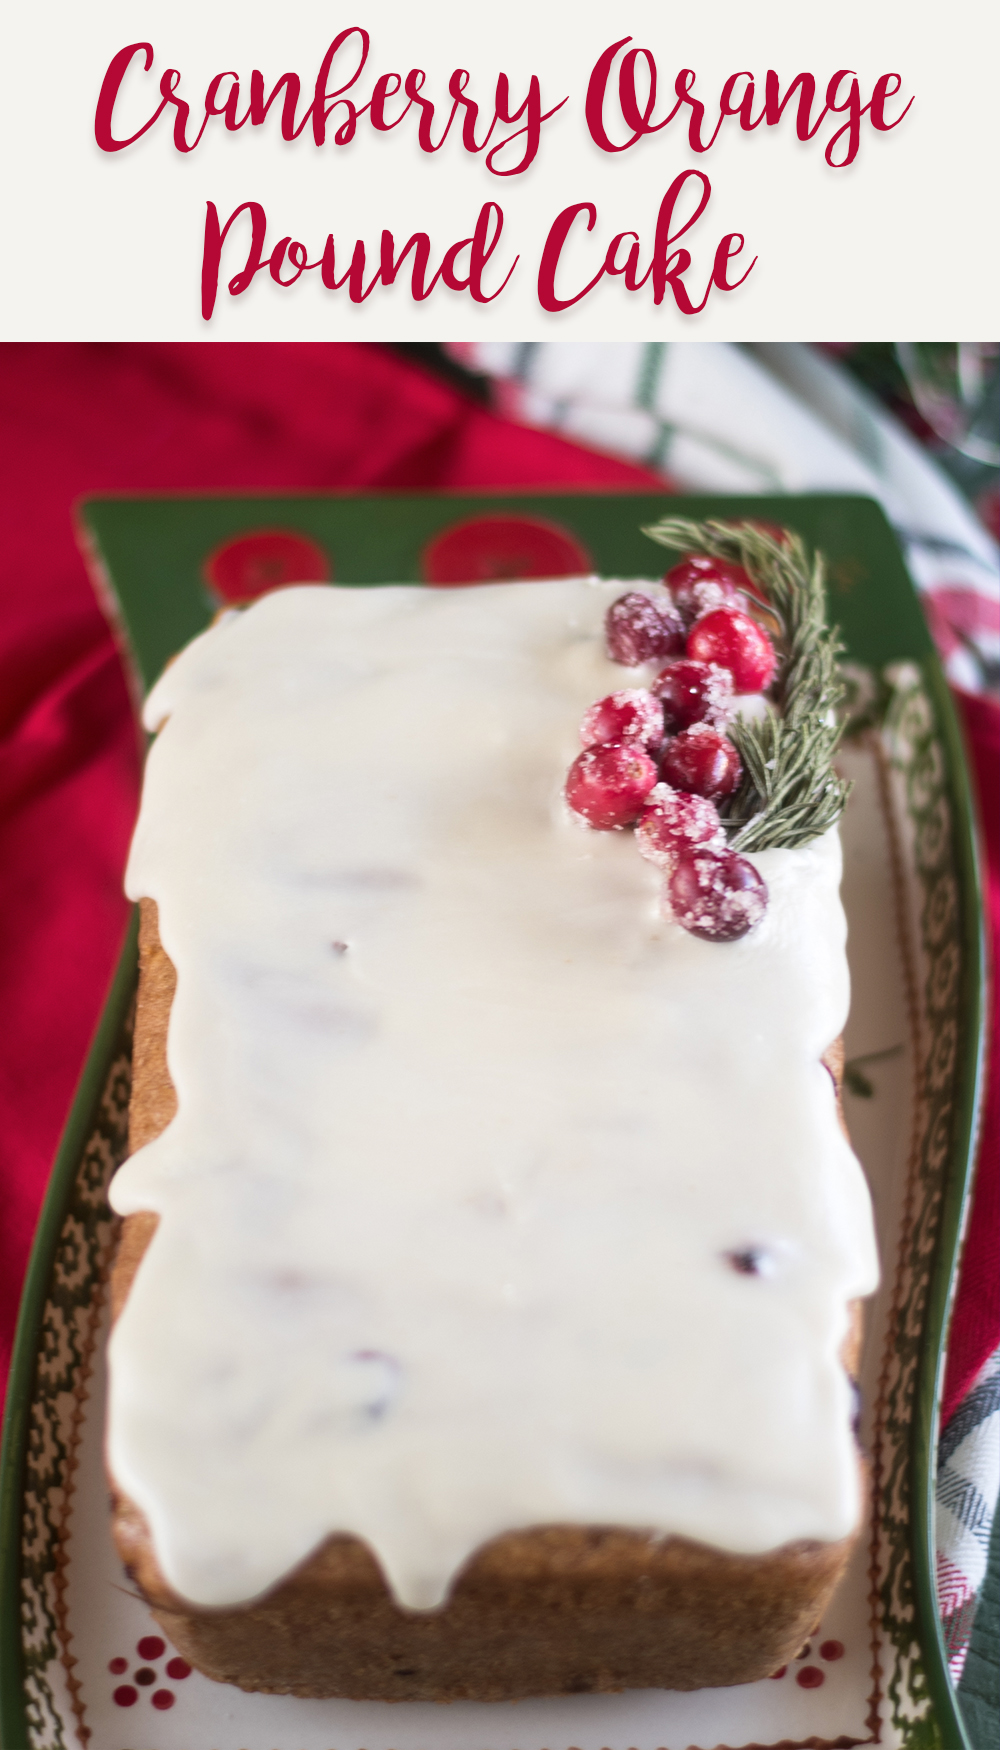 Vegan Cranberry Orange Pound Cake is a flavorful cake that is perfect for the holidays. #Christmas #Dessert #Vegan #poundcake #cranberry #orange #holiday #christmasrecipes #winter #veganrecipes